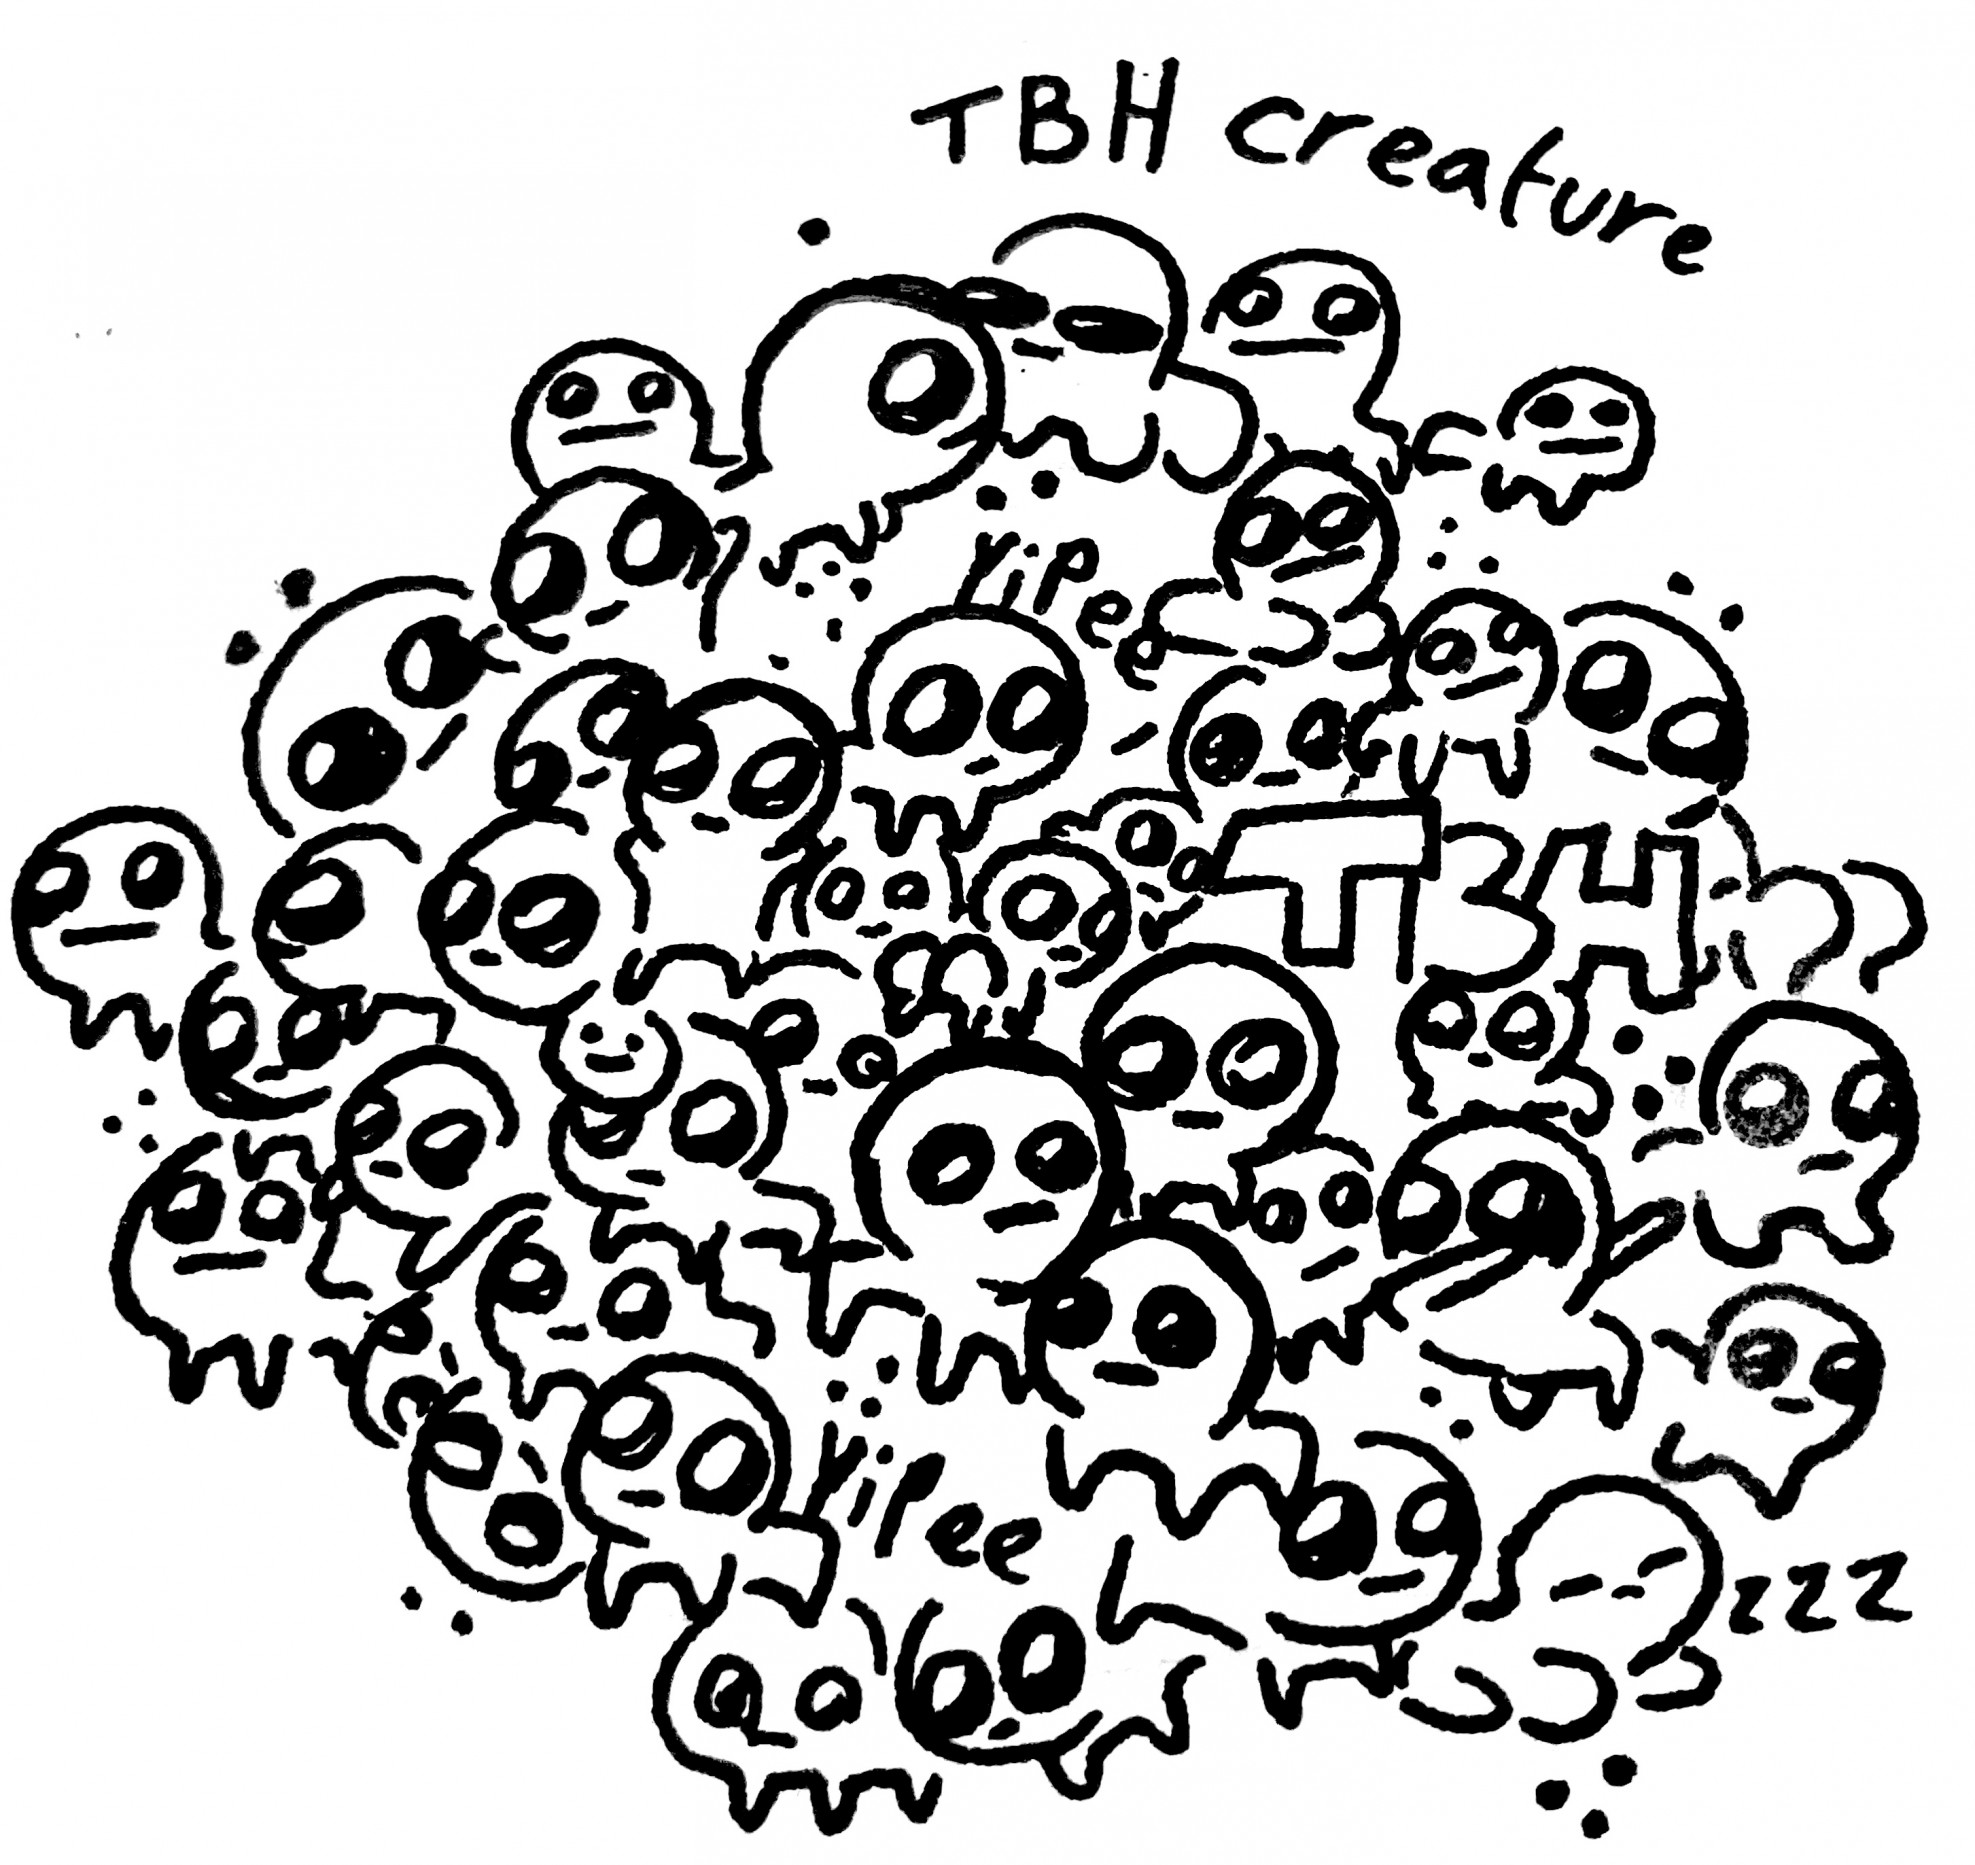 TBH creature drawing